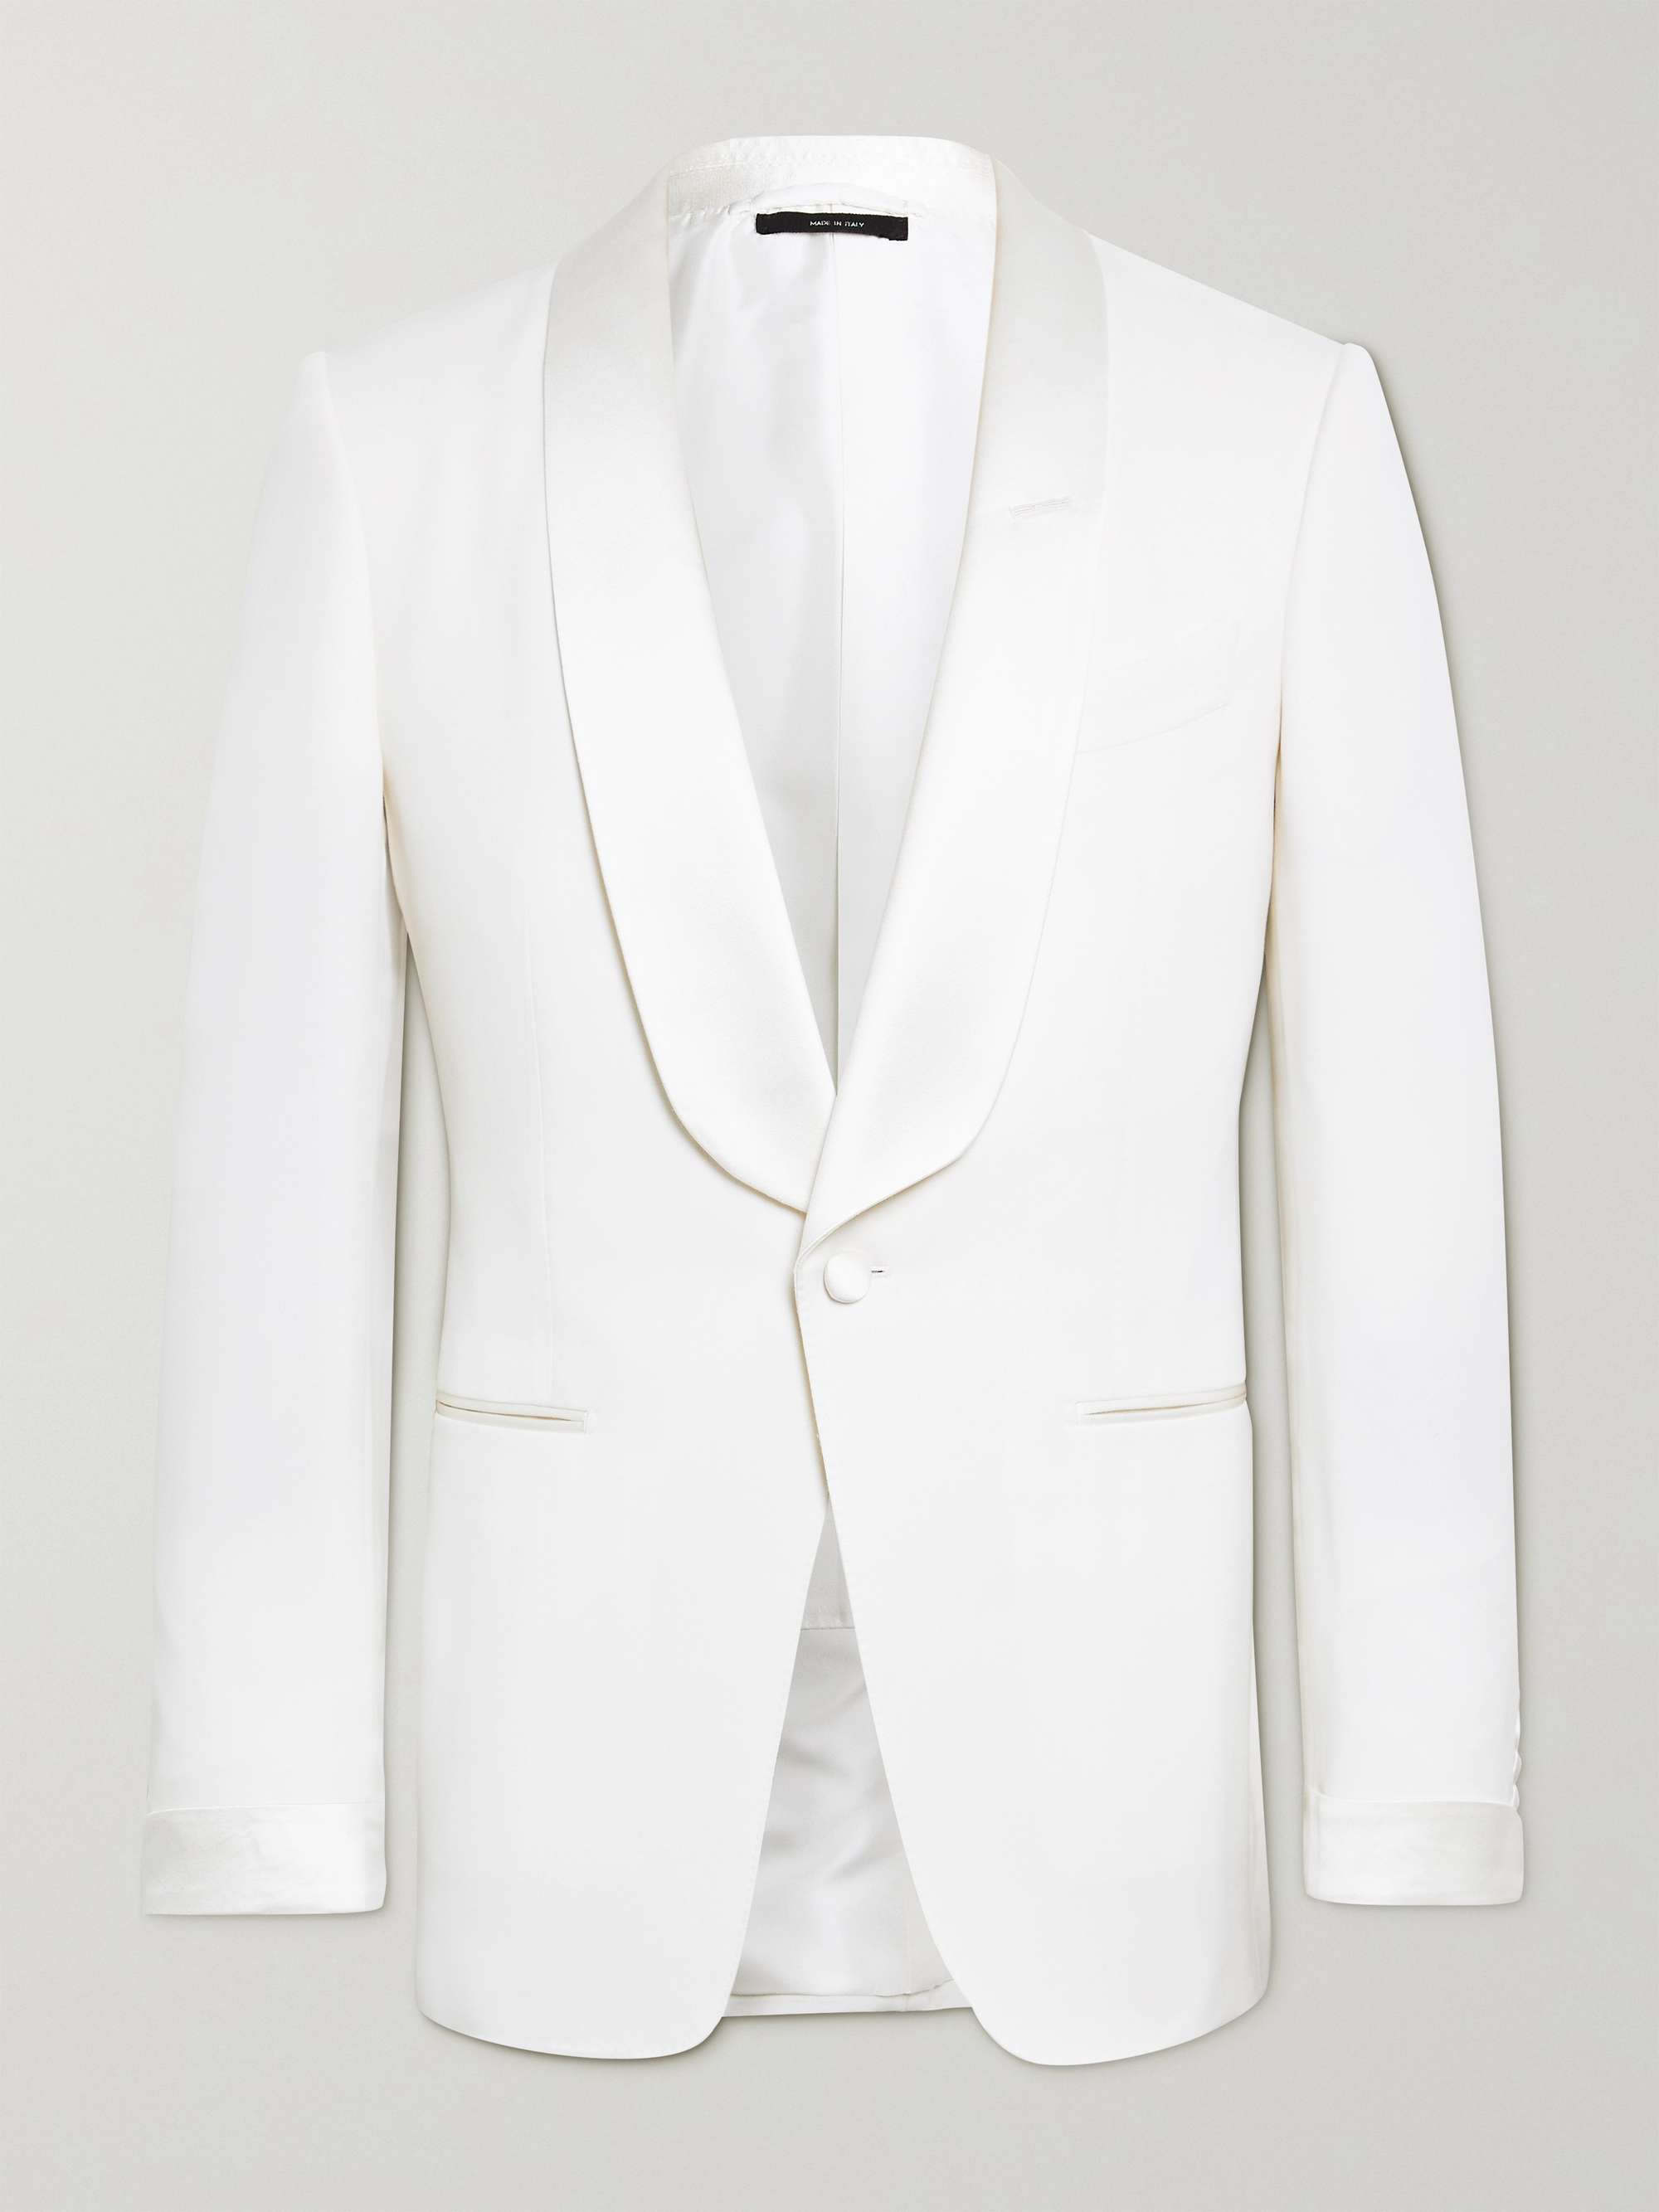 TOM FORD O'Connor Slim-Fit Satin-Trimmed Wool and Mohair-Blend Tuxedo Jacket